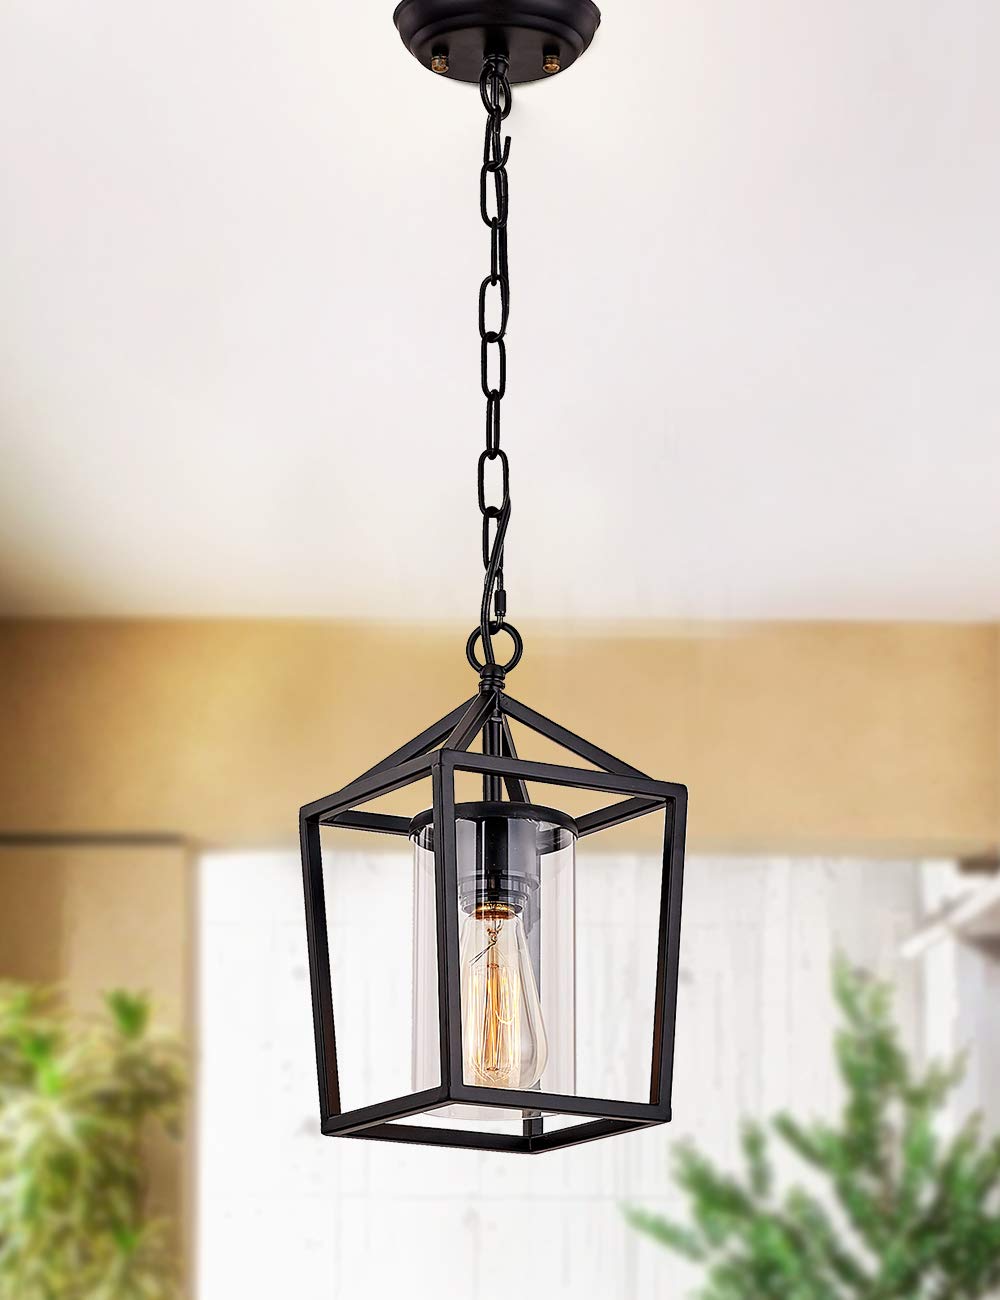 Capslpad Outdoor Pendant Light for Porch,1-Light Modern Metal Vintage Cage Hanging Lantern Light Adjustable Pendant Light Fixtures with Glass Shade for Porch,Entryway,Doorway,Farmhouse,Foyer